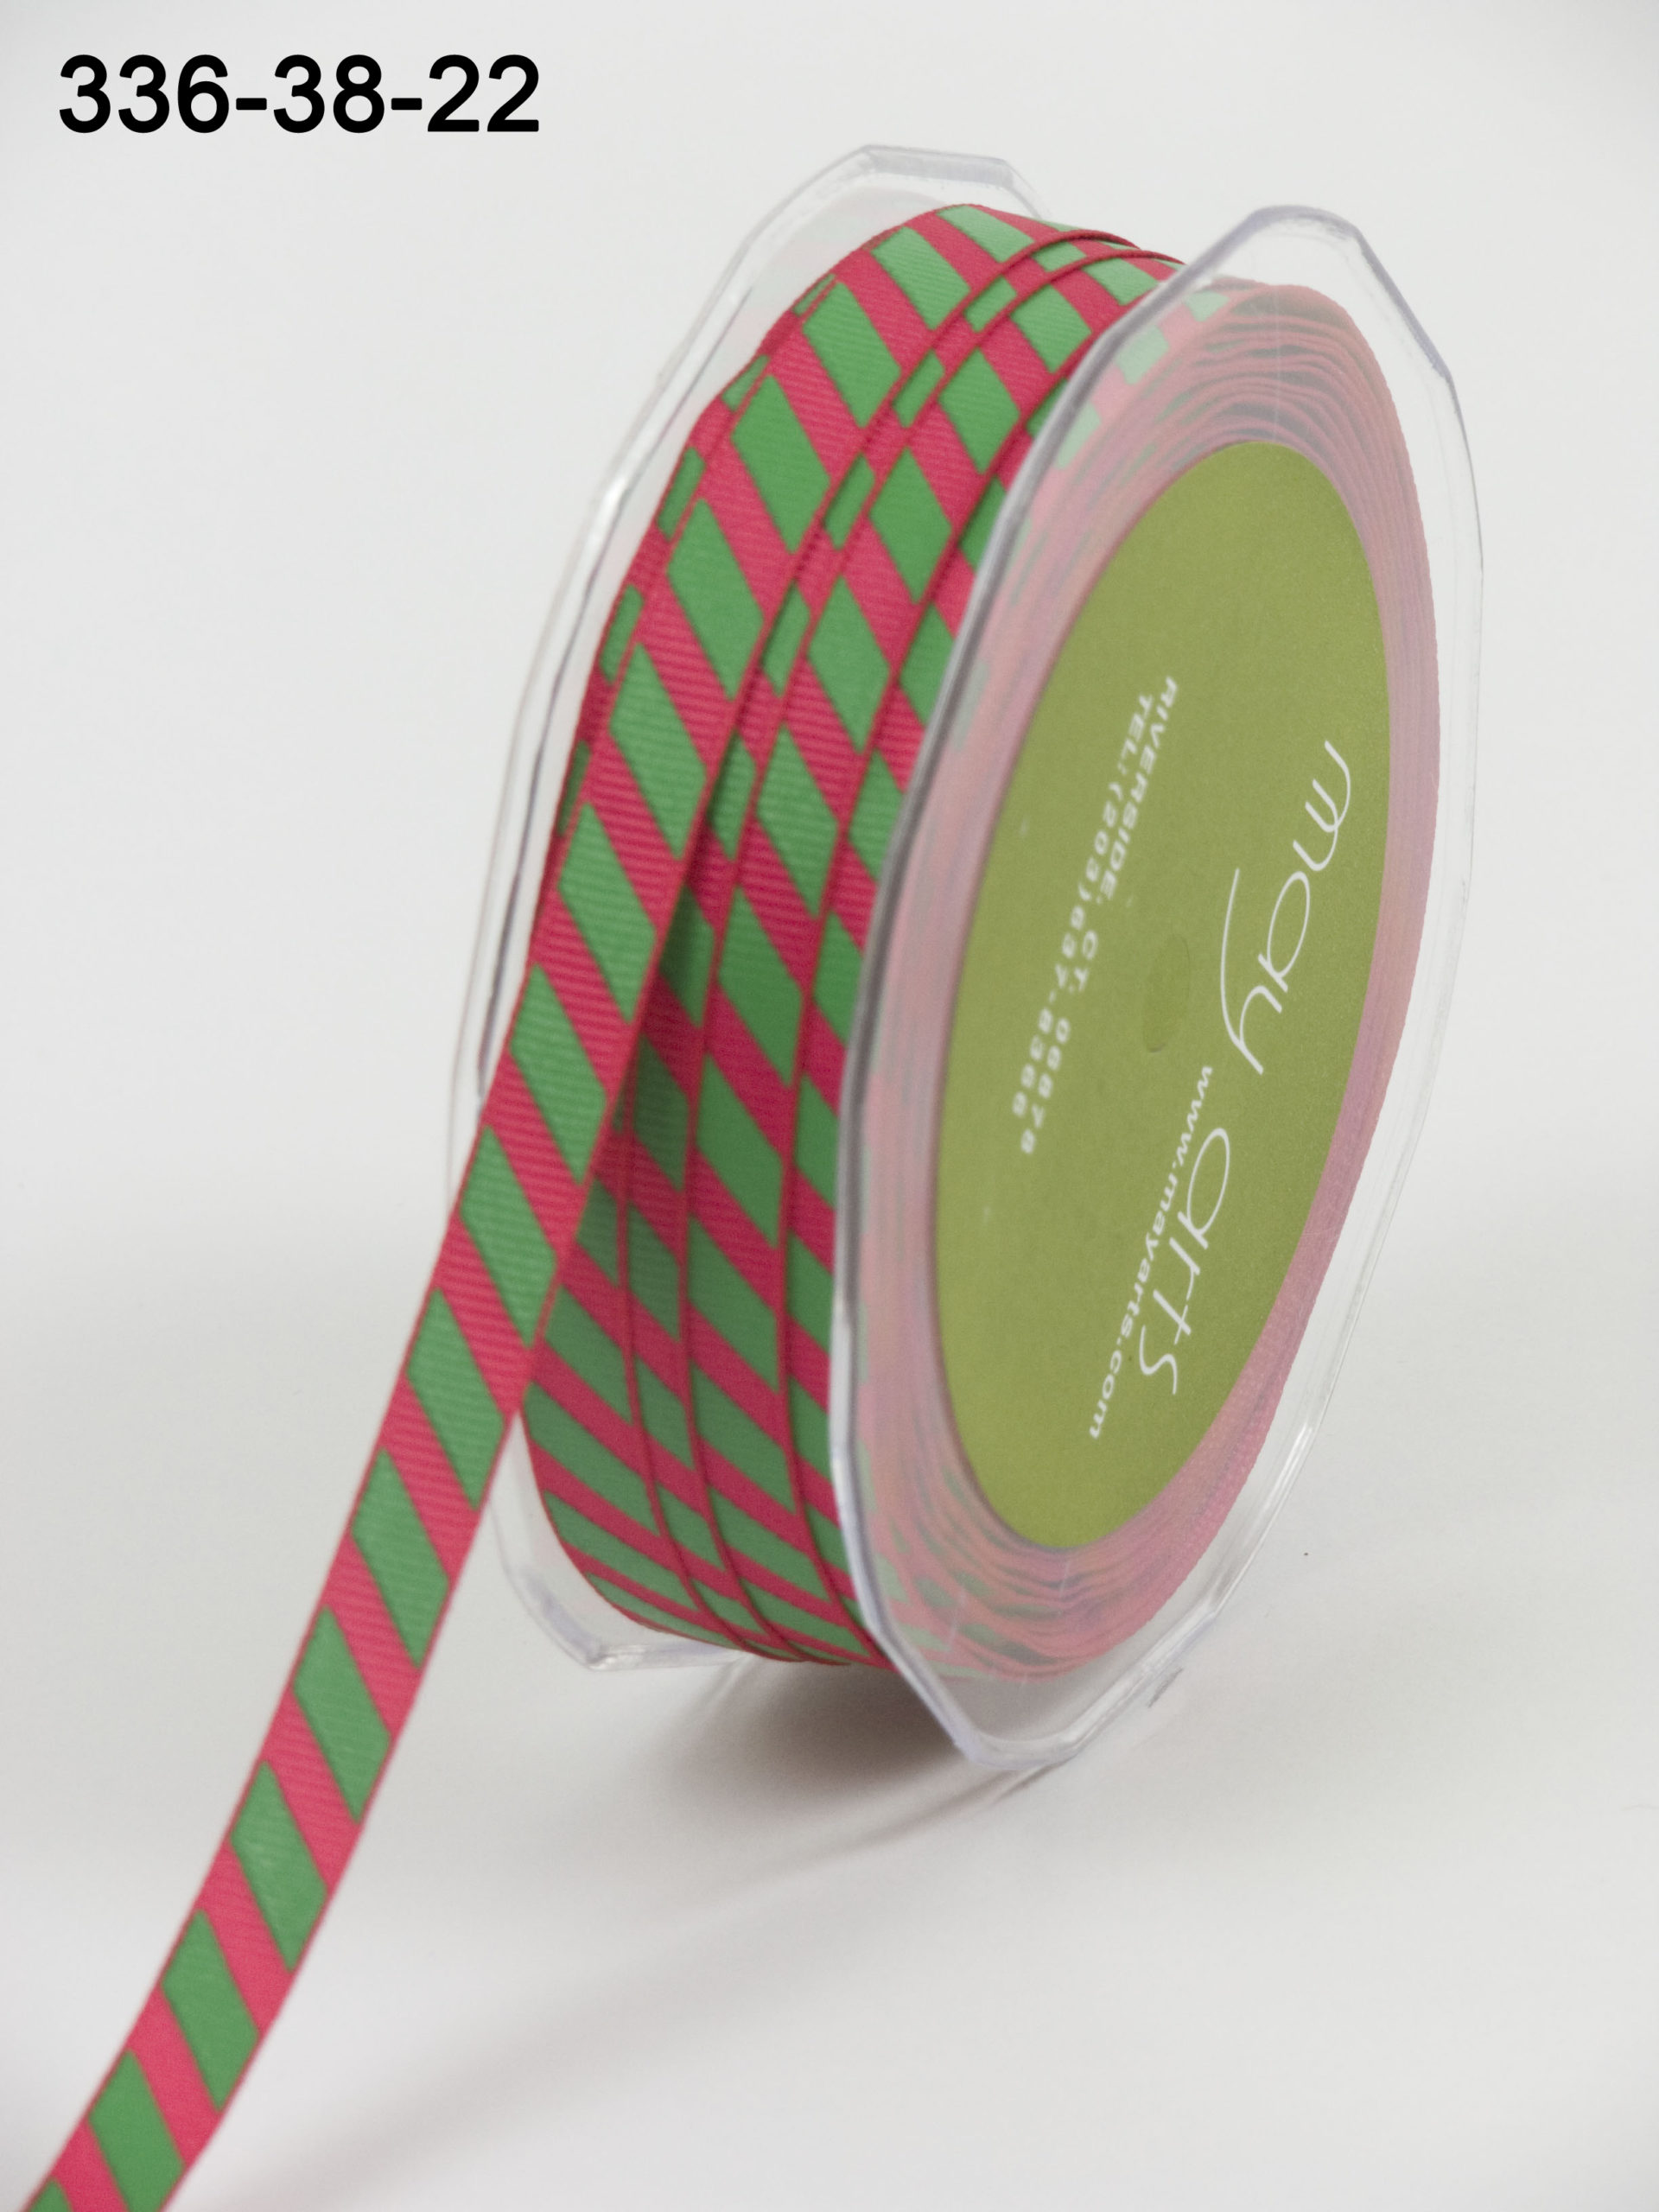 3/8 Inch Ribbon With White Stitch Border, Double Face Grossgrain, Primary  Colors Red,black,navy,pink,orchid, Brown, Orange, Sage Green 